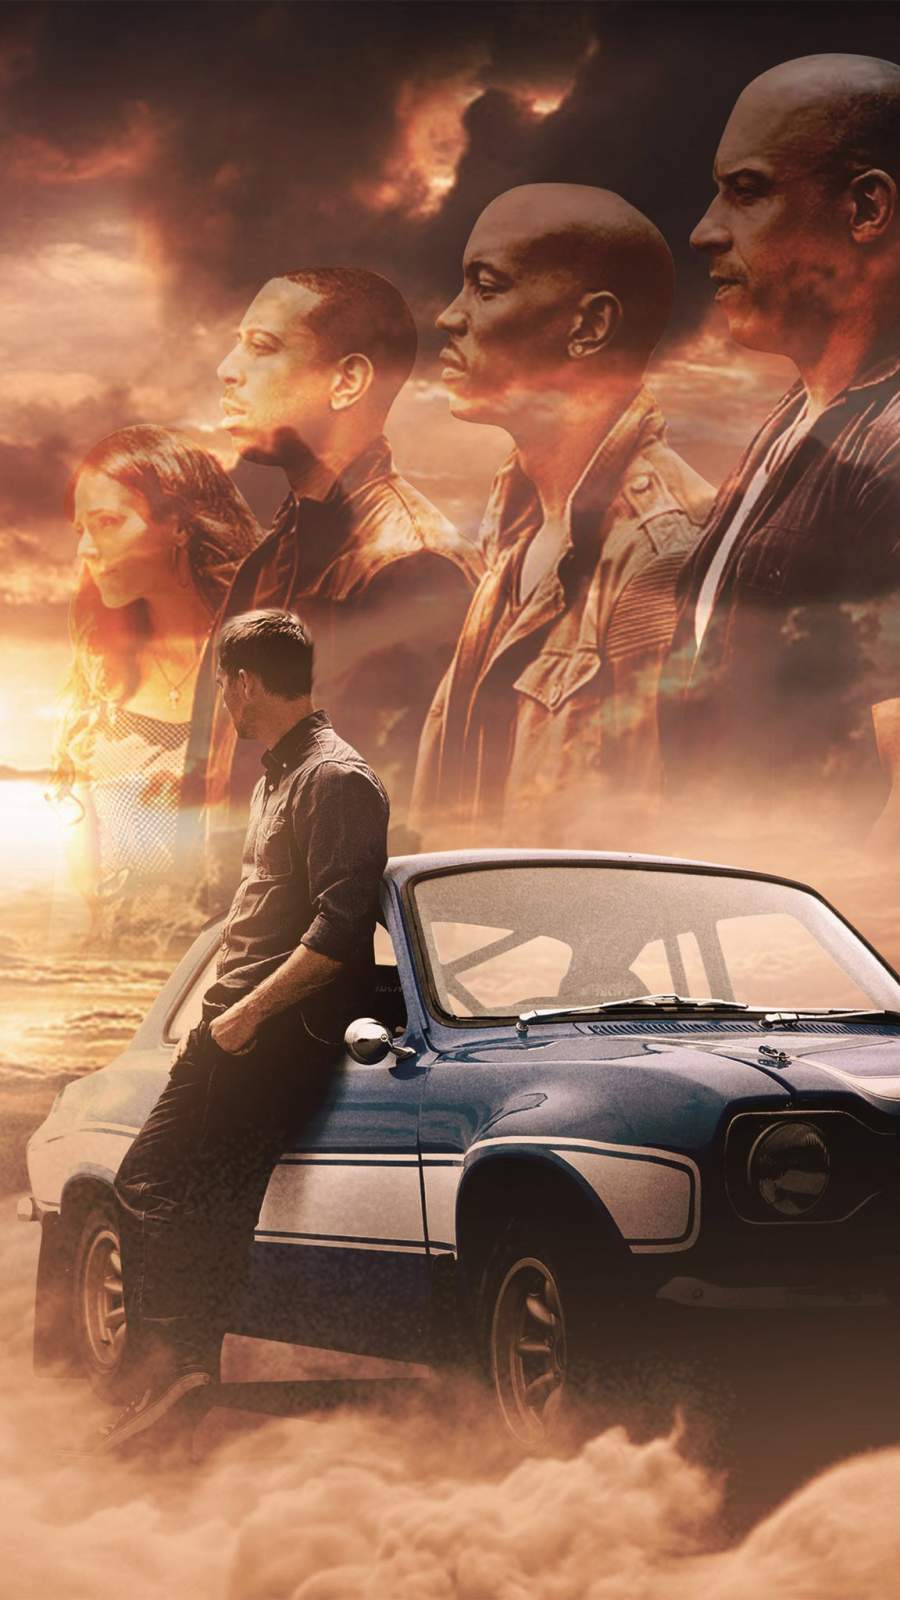 ludacris in fast and furious 9 2020 movie iPhone X Wallpapers Free Download